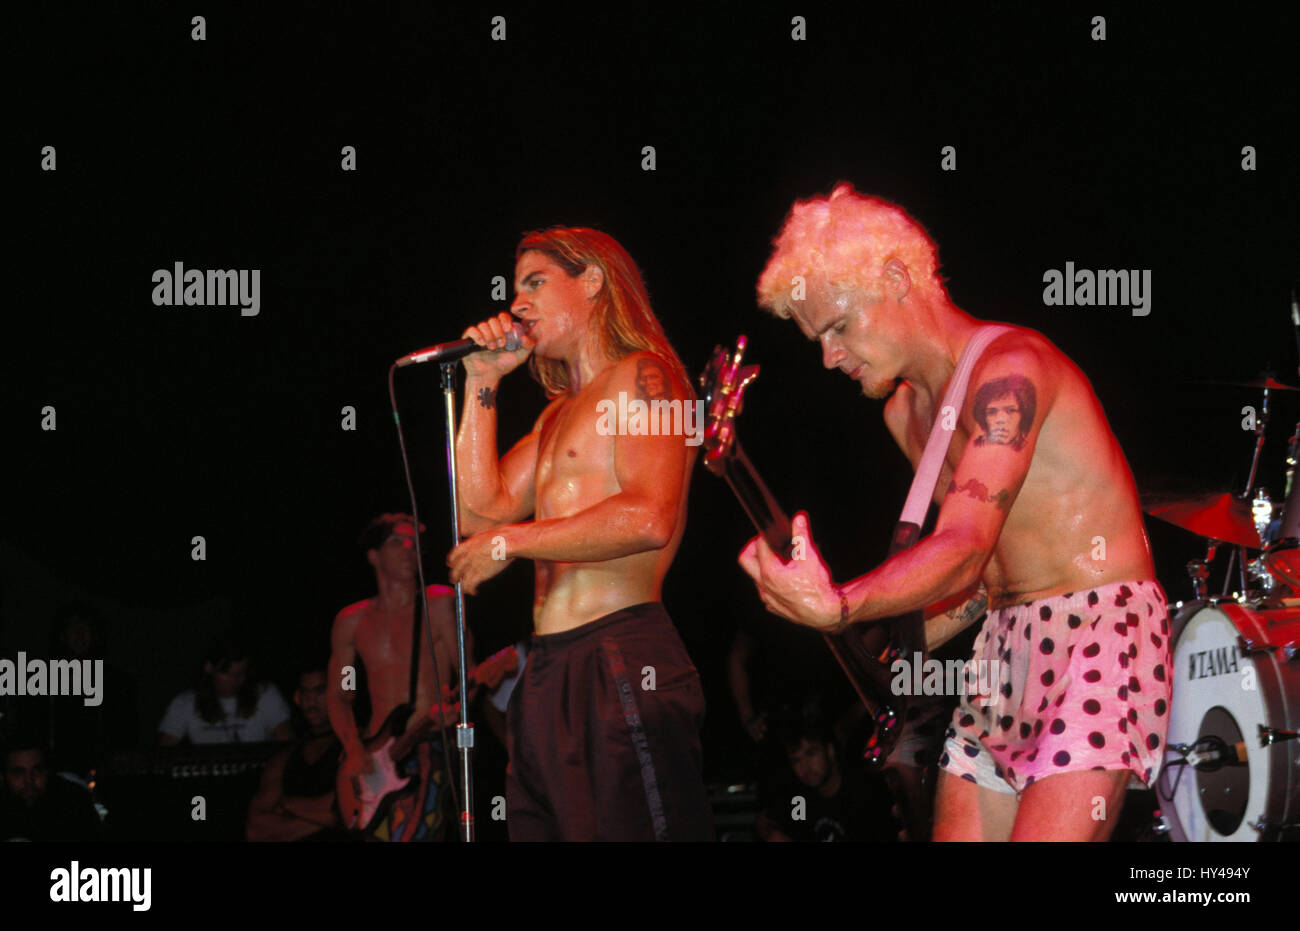 Red Hot Chili Peppers performing at The Palladium in Hollywood, CA. April  4, 1992. Credit: Kevin Estrada / MediaPunch Stock Photo - Alamy